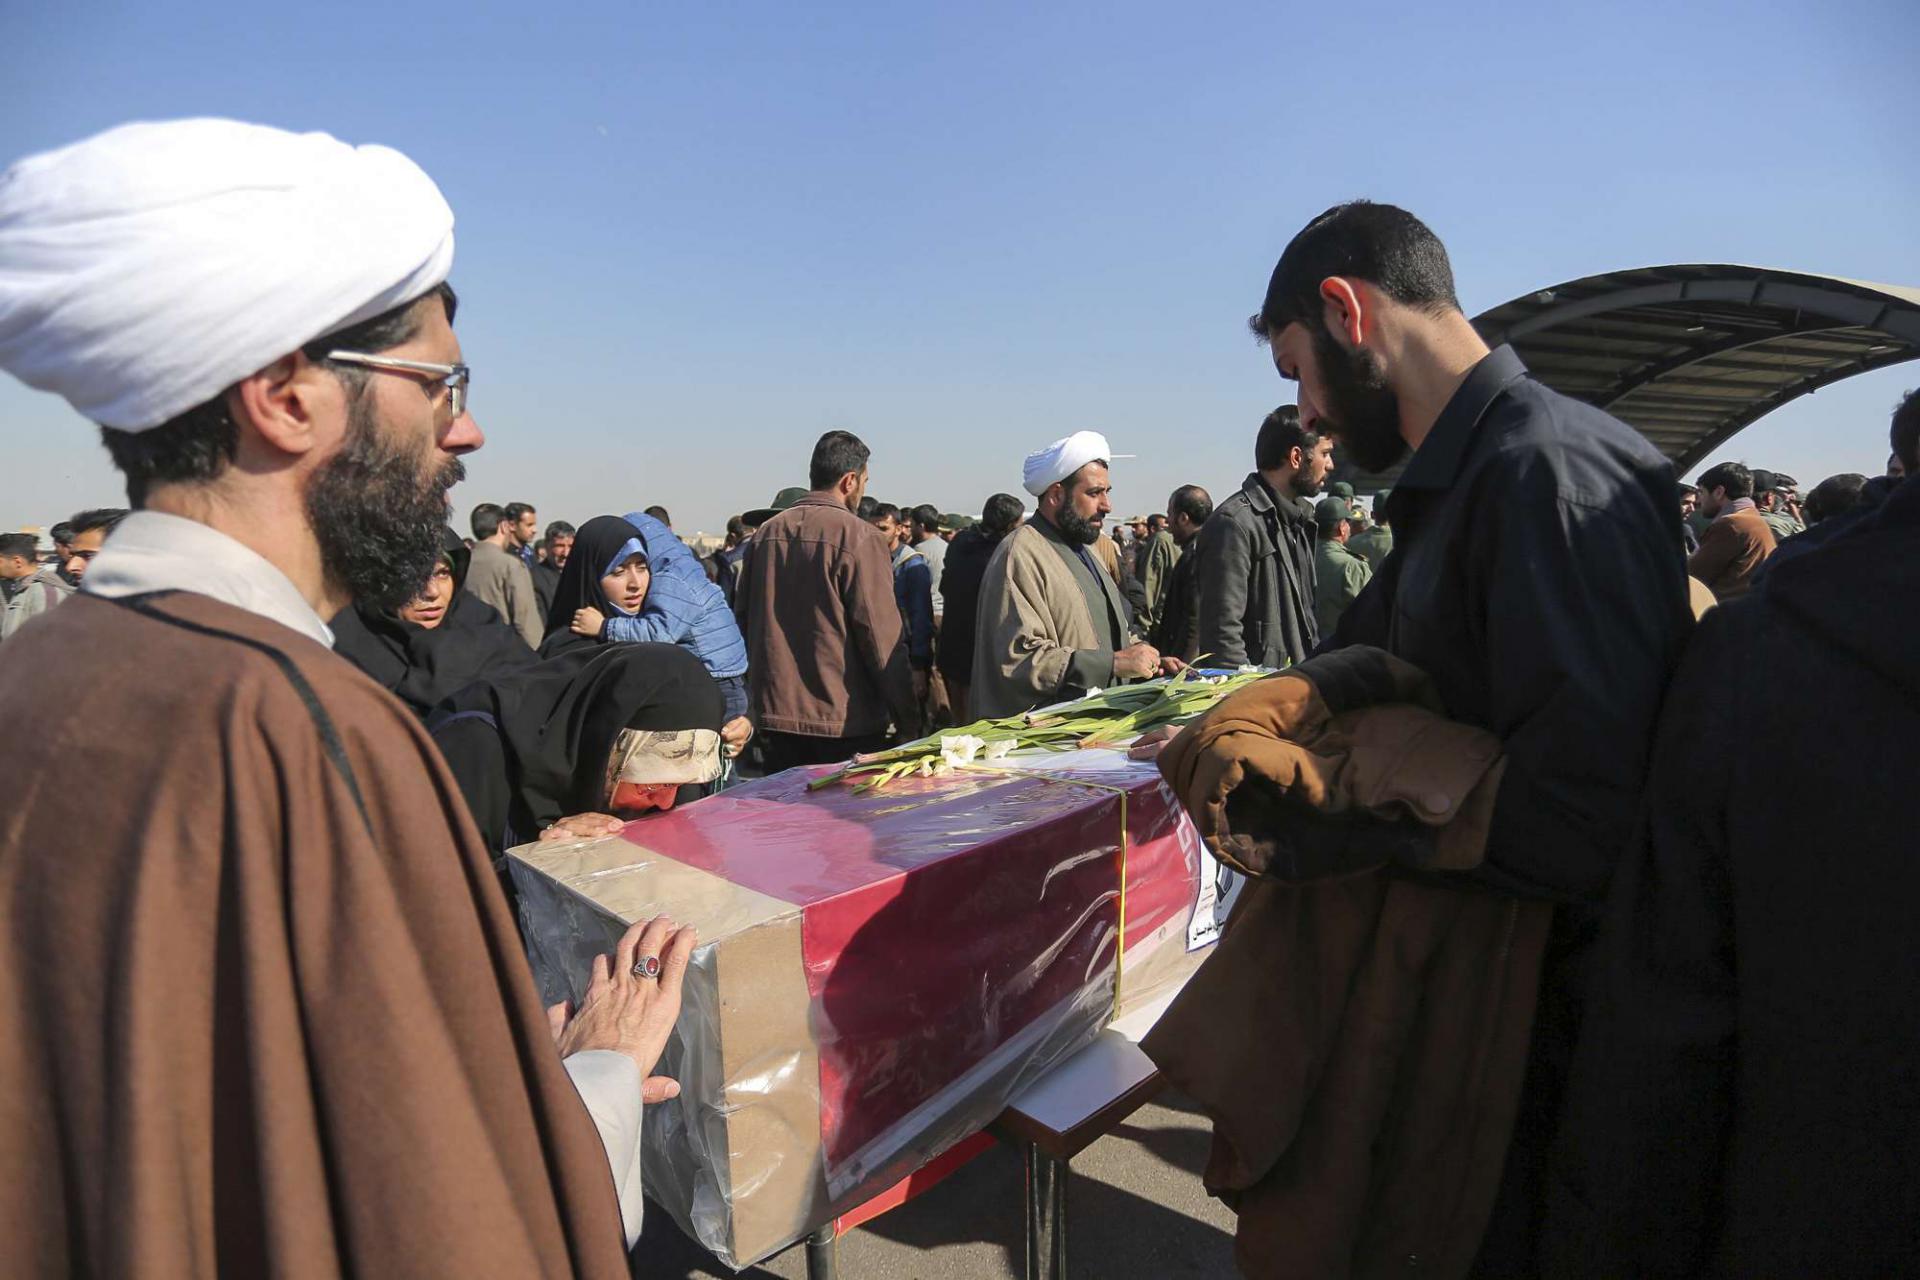 People mourn over a flag-draped coffin of a member of Iran's Revolutionary Guard who was killed in a suicide car bombing that struck a bus carrying the Guard troops, killing at least 27 people on Wednesday, upon arrival of the victims bodies and wounded troops at an airport in Isfahan, Thursday, Feb. 14, 2019.